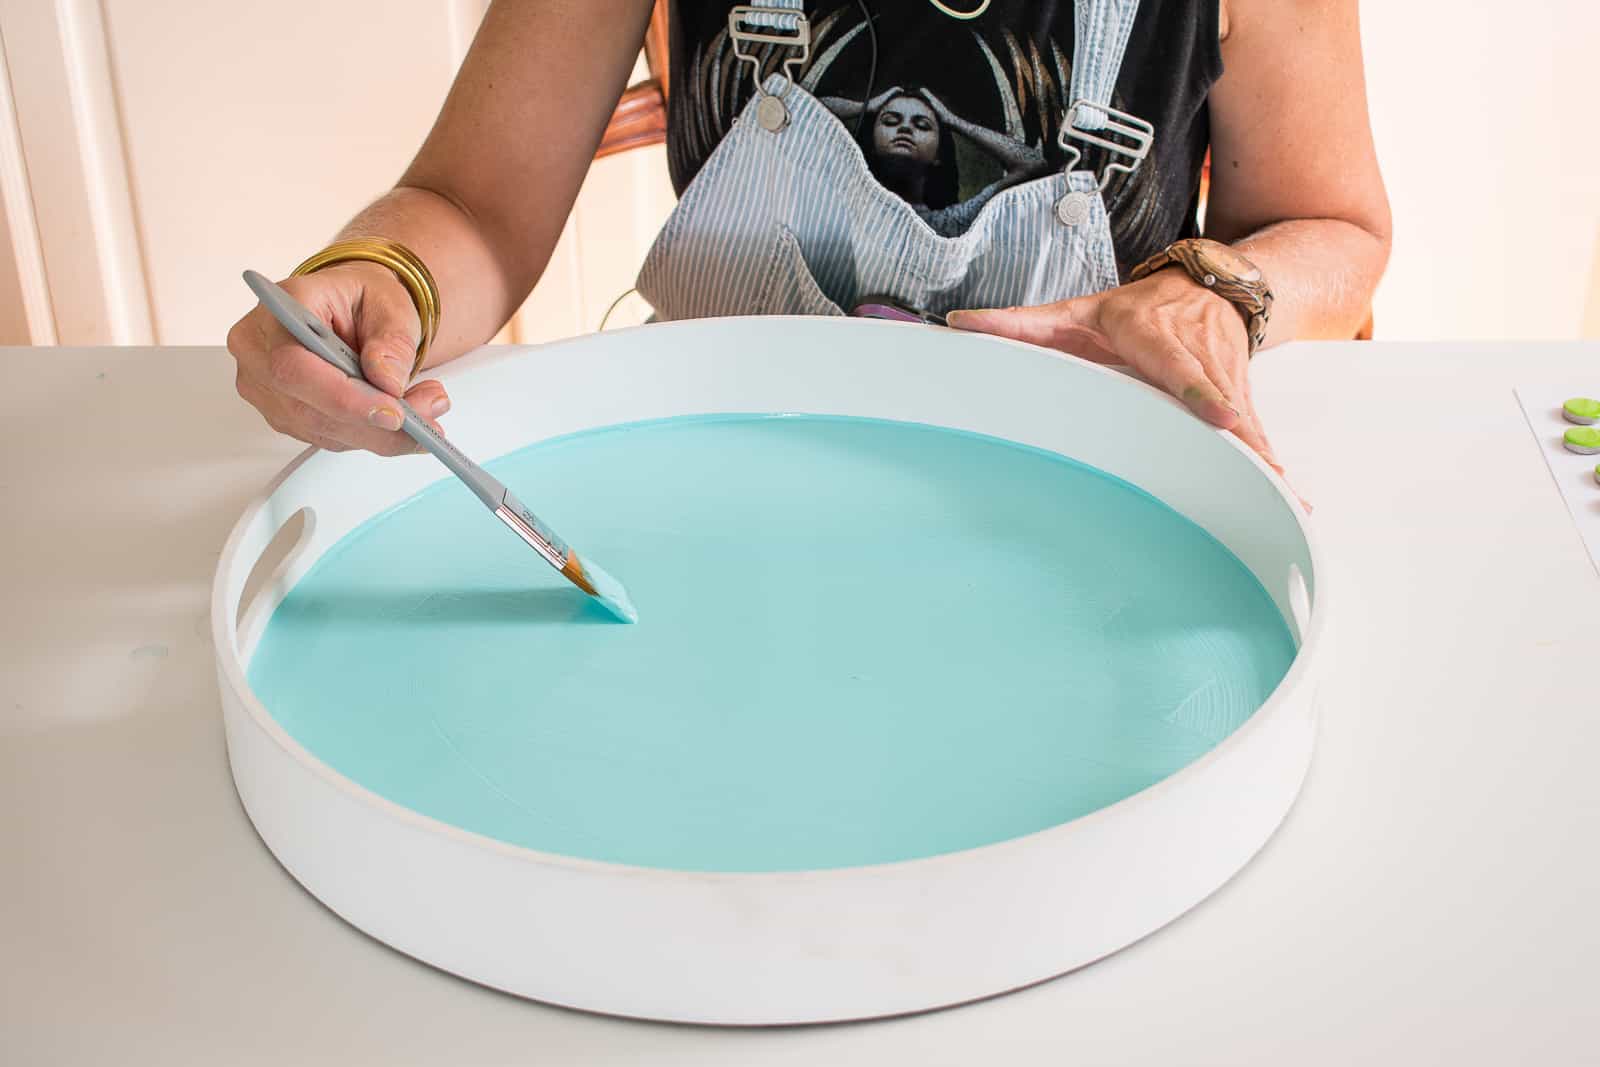 paint the bottom of the tray with craft paint